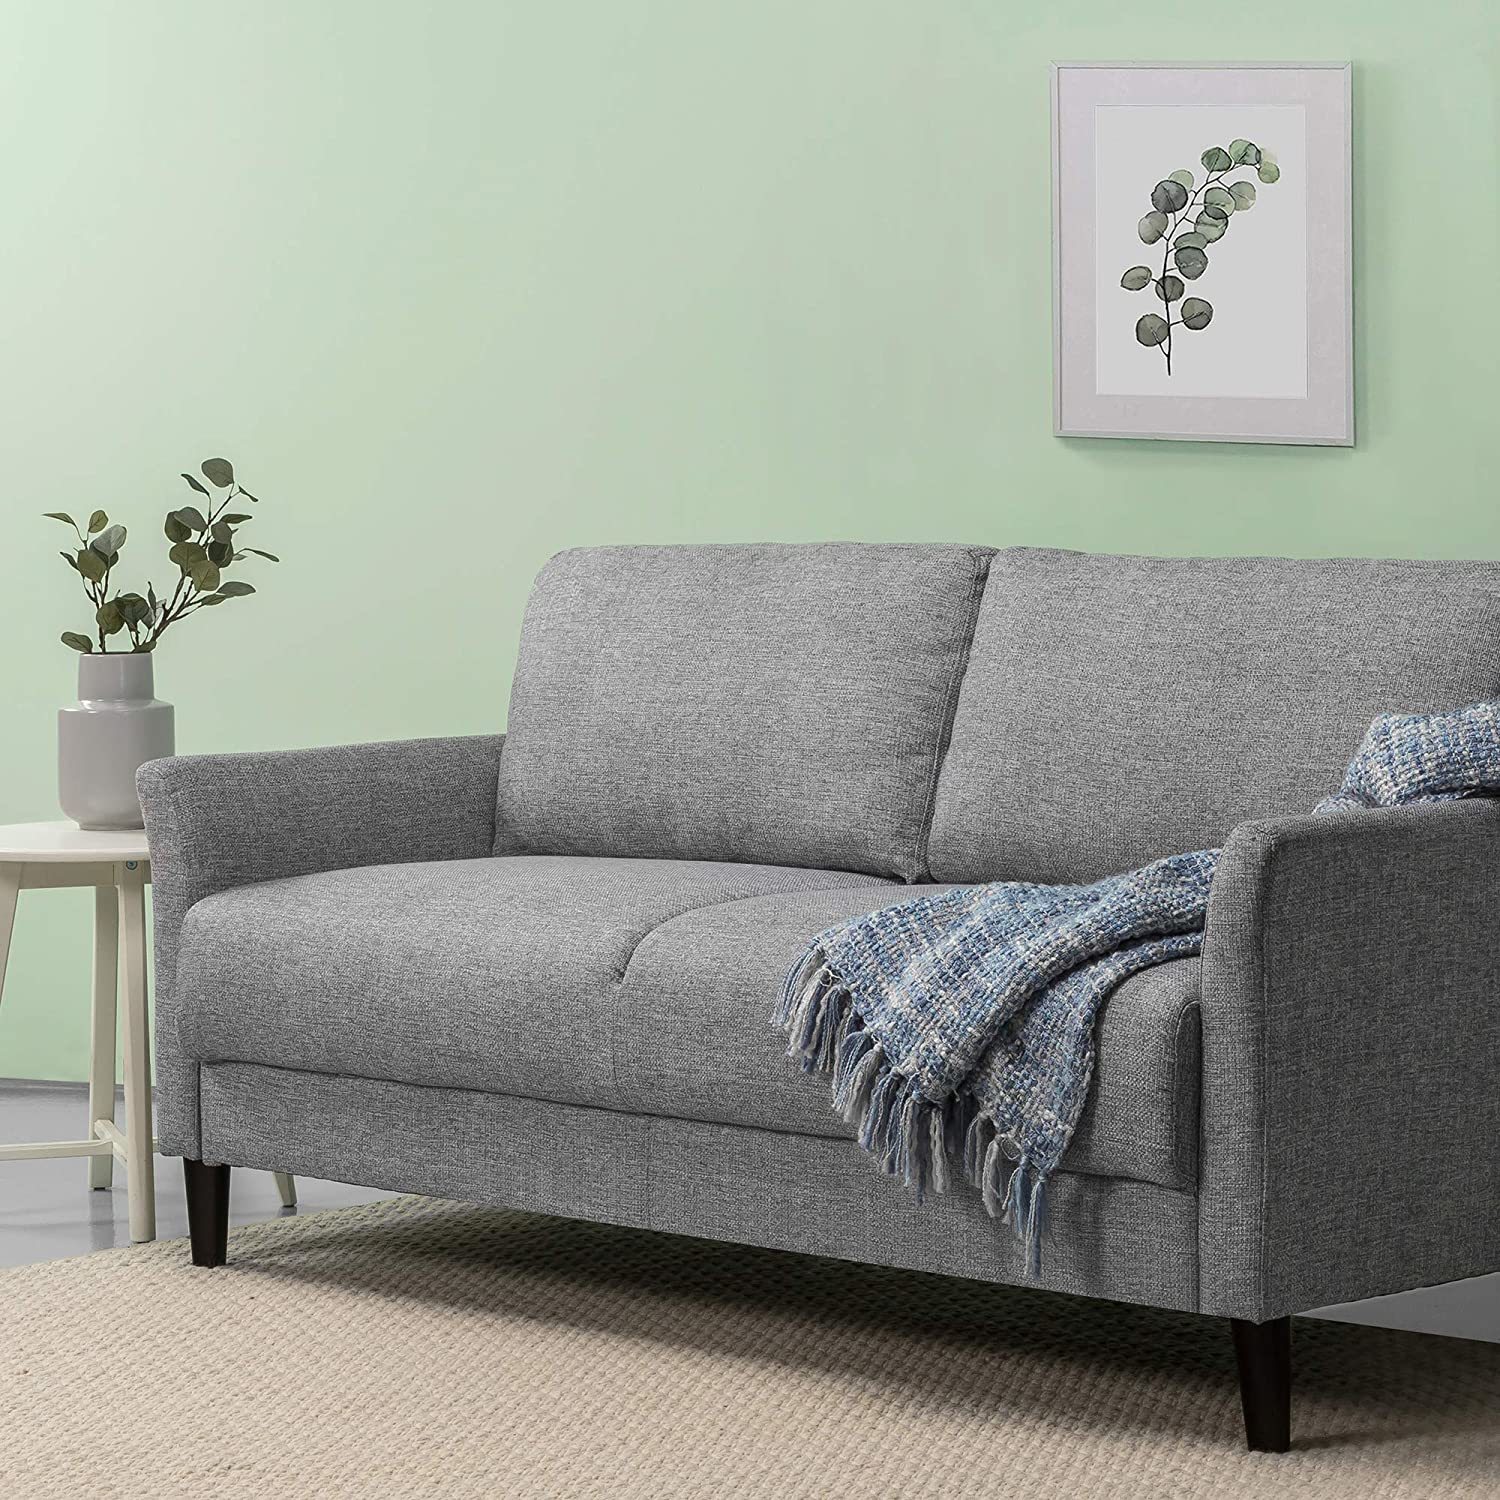 ZINUS Jackie Sofa Couch / Easy, Tool-Free Assembly, Soft Grey Soft Grey Sofa - $389.99